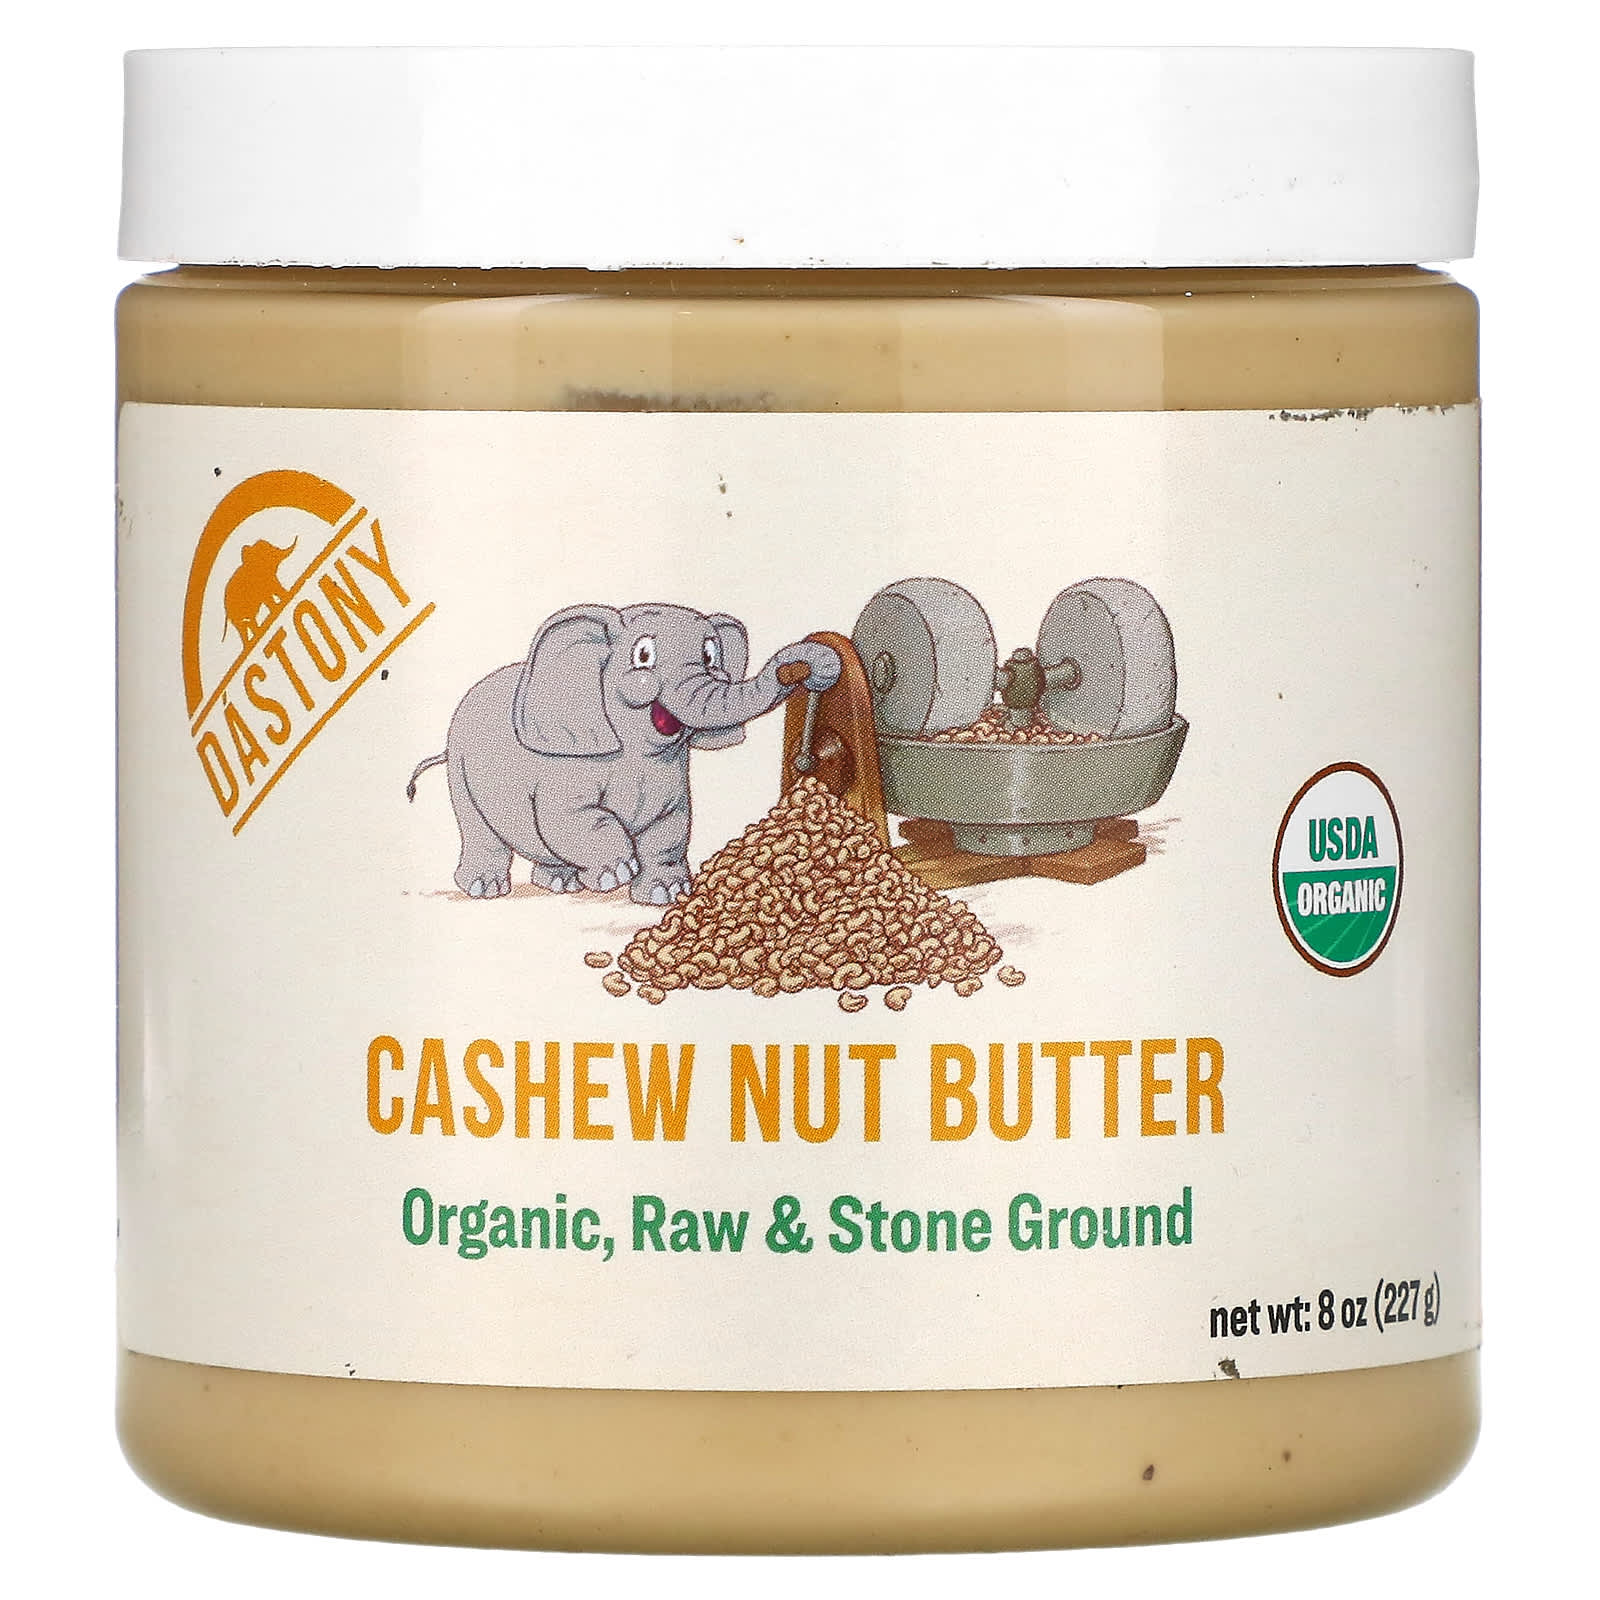 Organic Sprouted Almond Butter